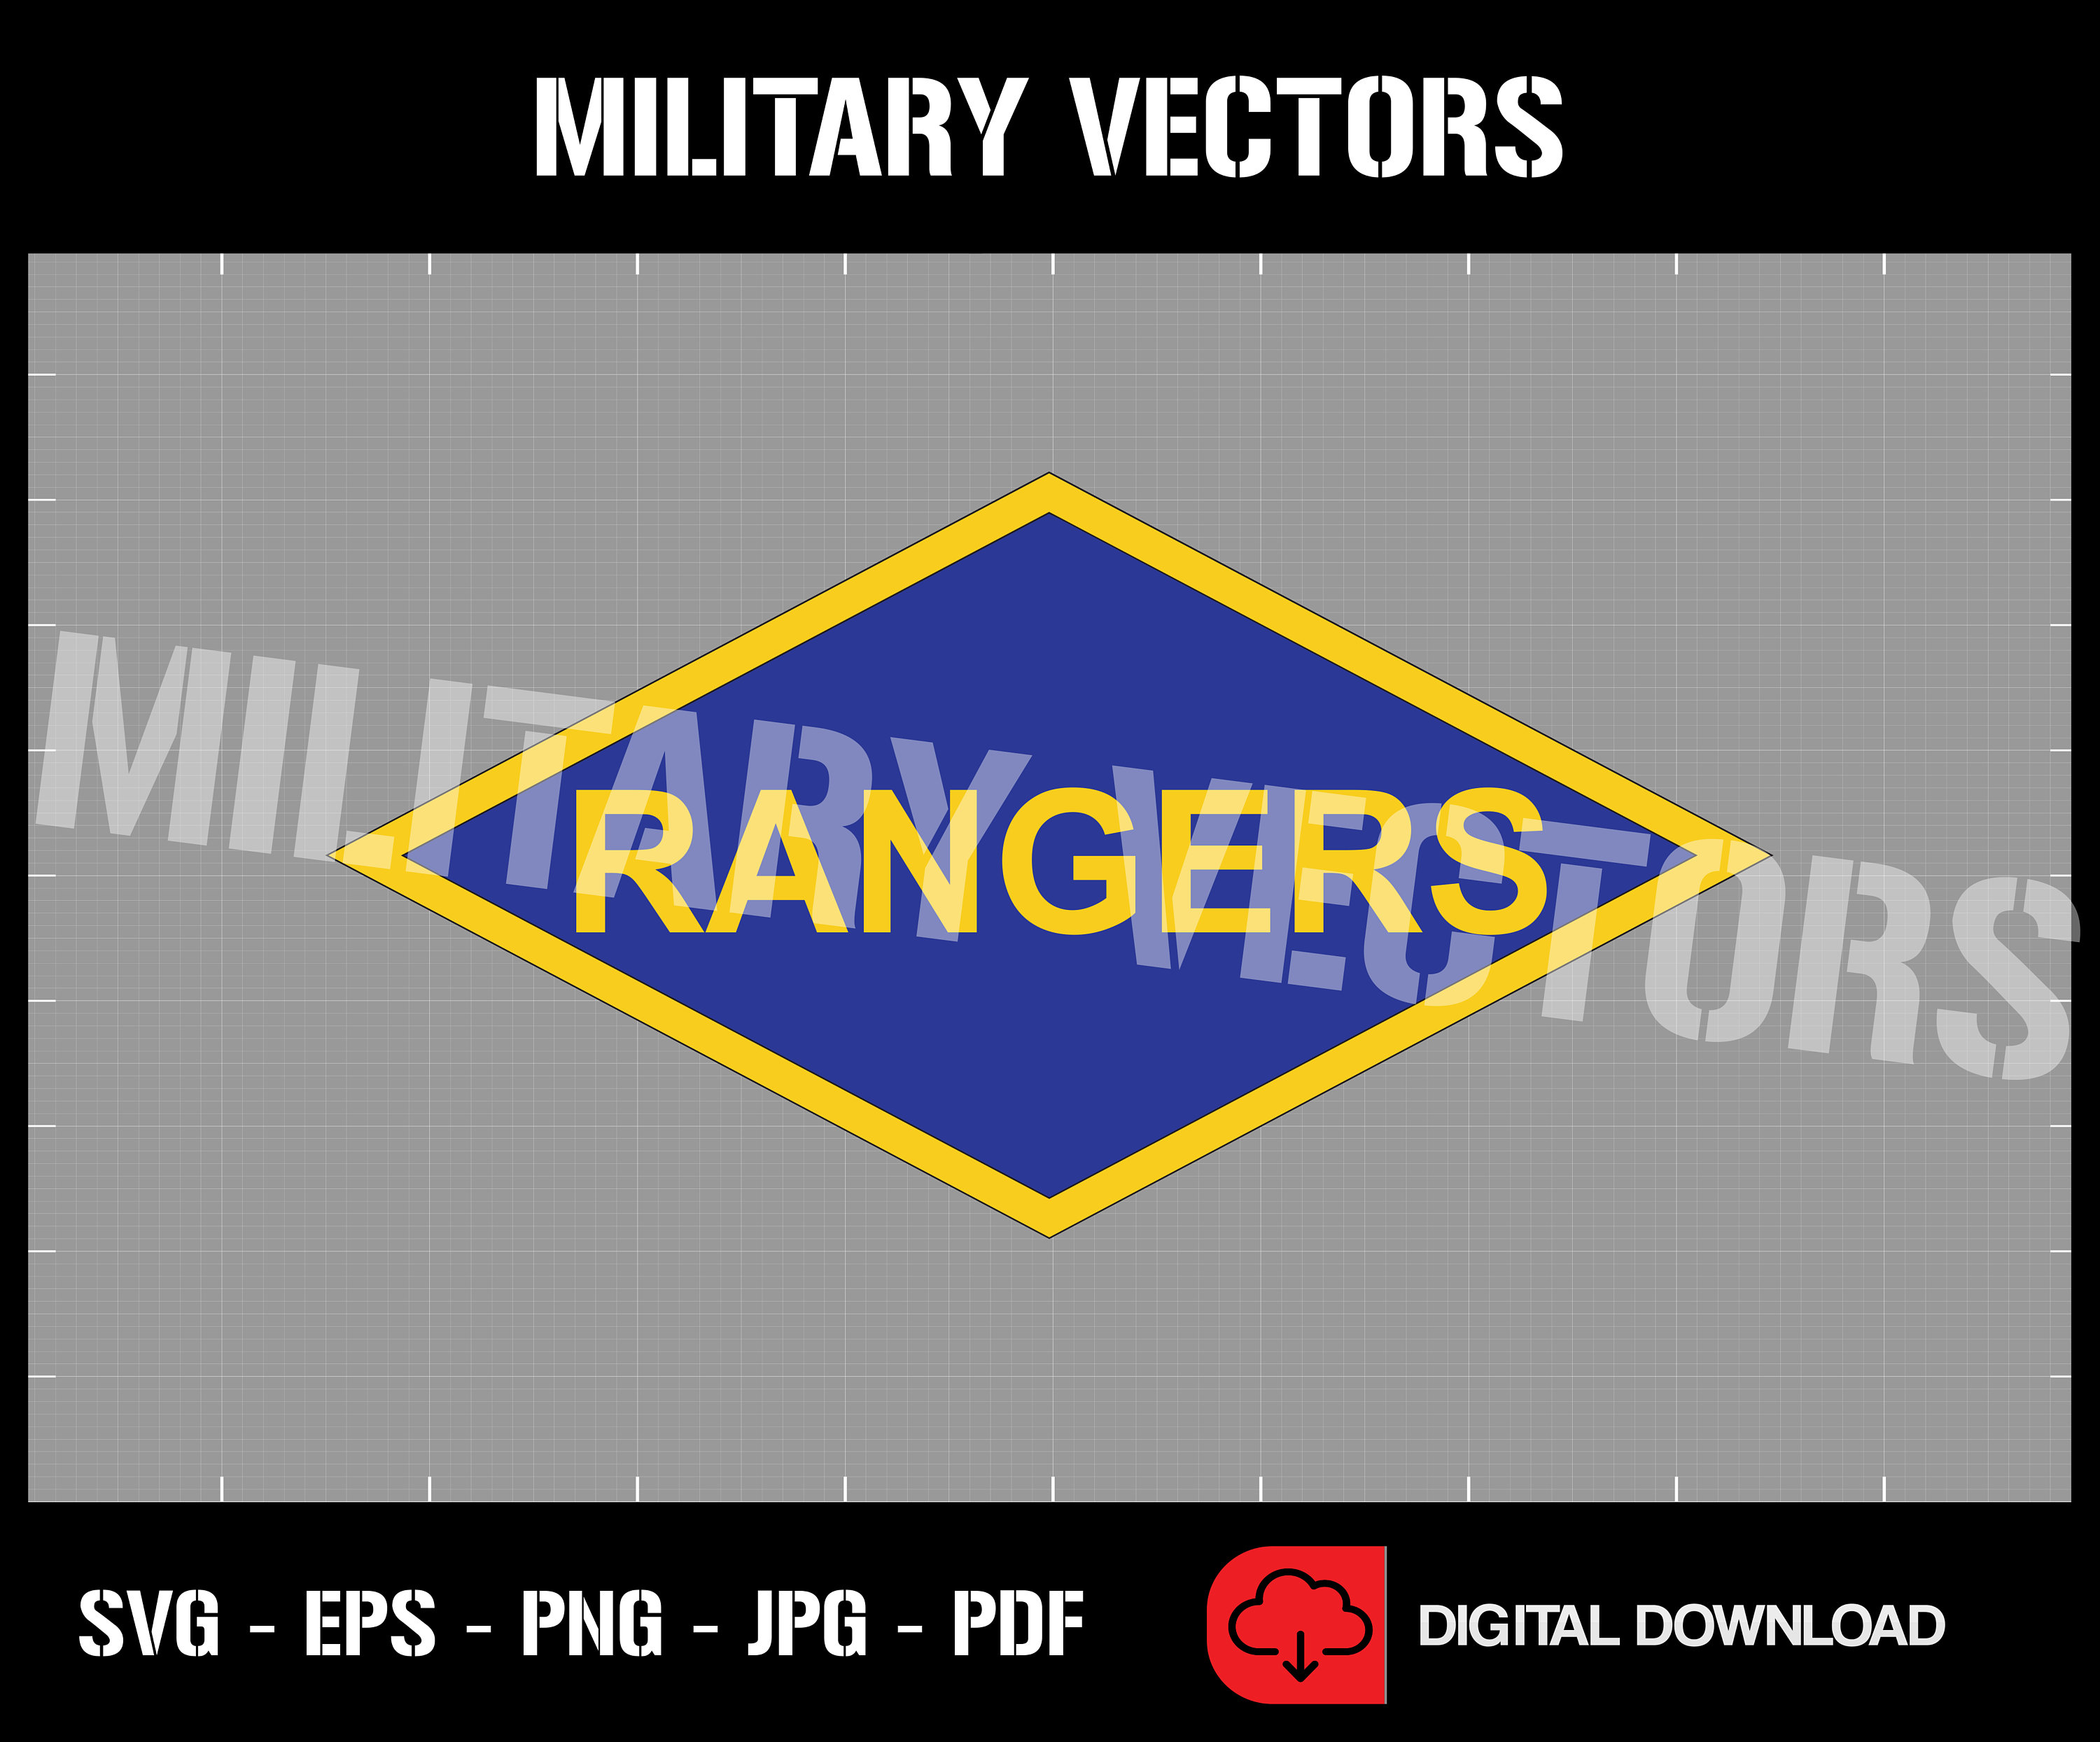 22,270 Military Patch Images, Stock Photos, 3D objects, & Vectors